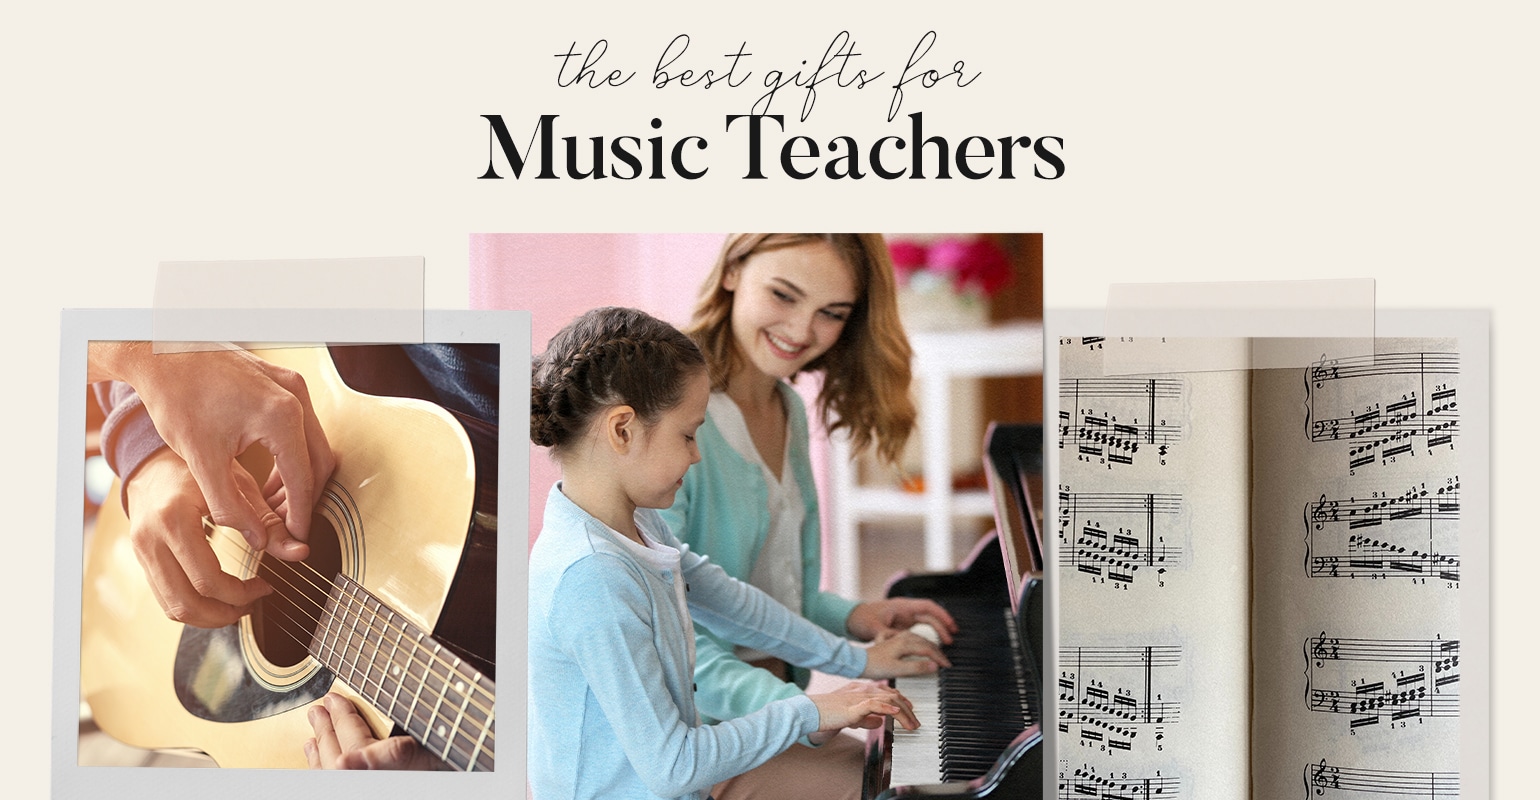 7 Gifts For Music Teachers That Hit the Right Note